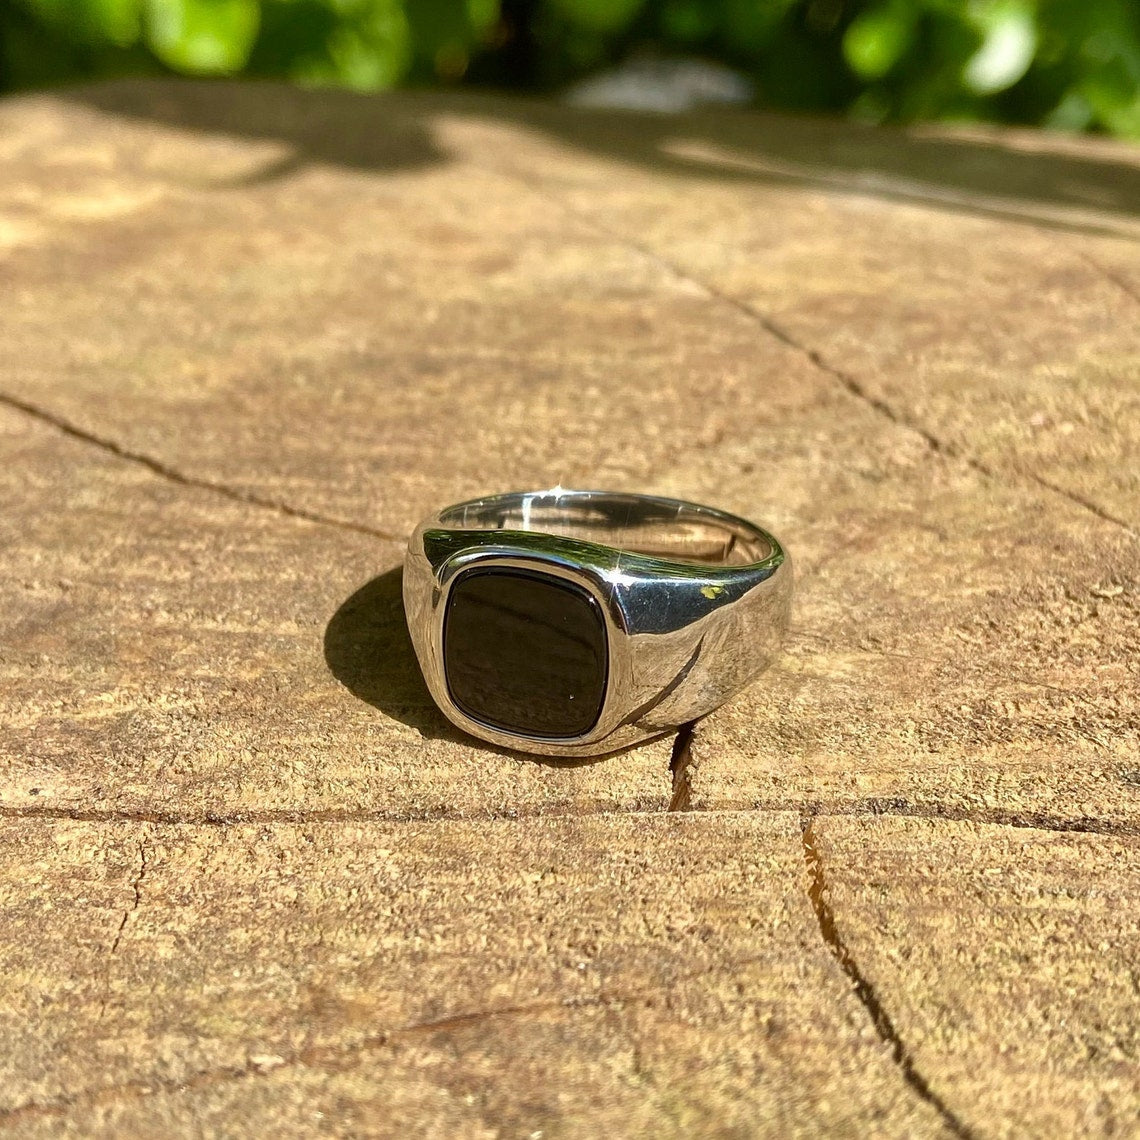 18K Stainless Steel Onyx Ring - Mens silver and black square signet ring - rings for men - unisex band ring - mens jewelry - mens jewellery